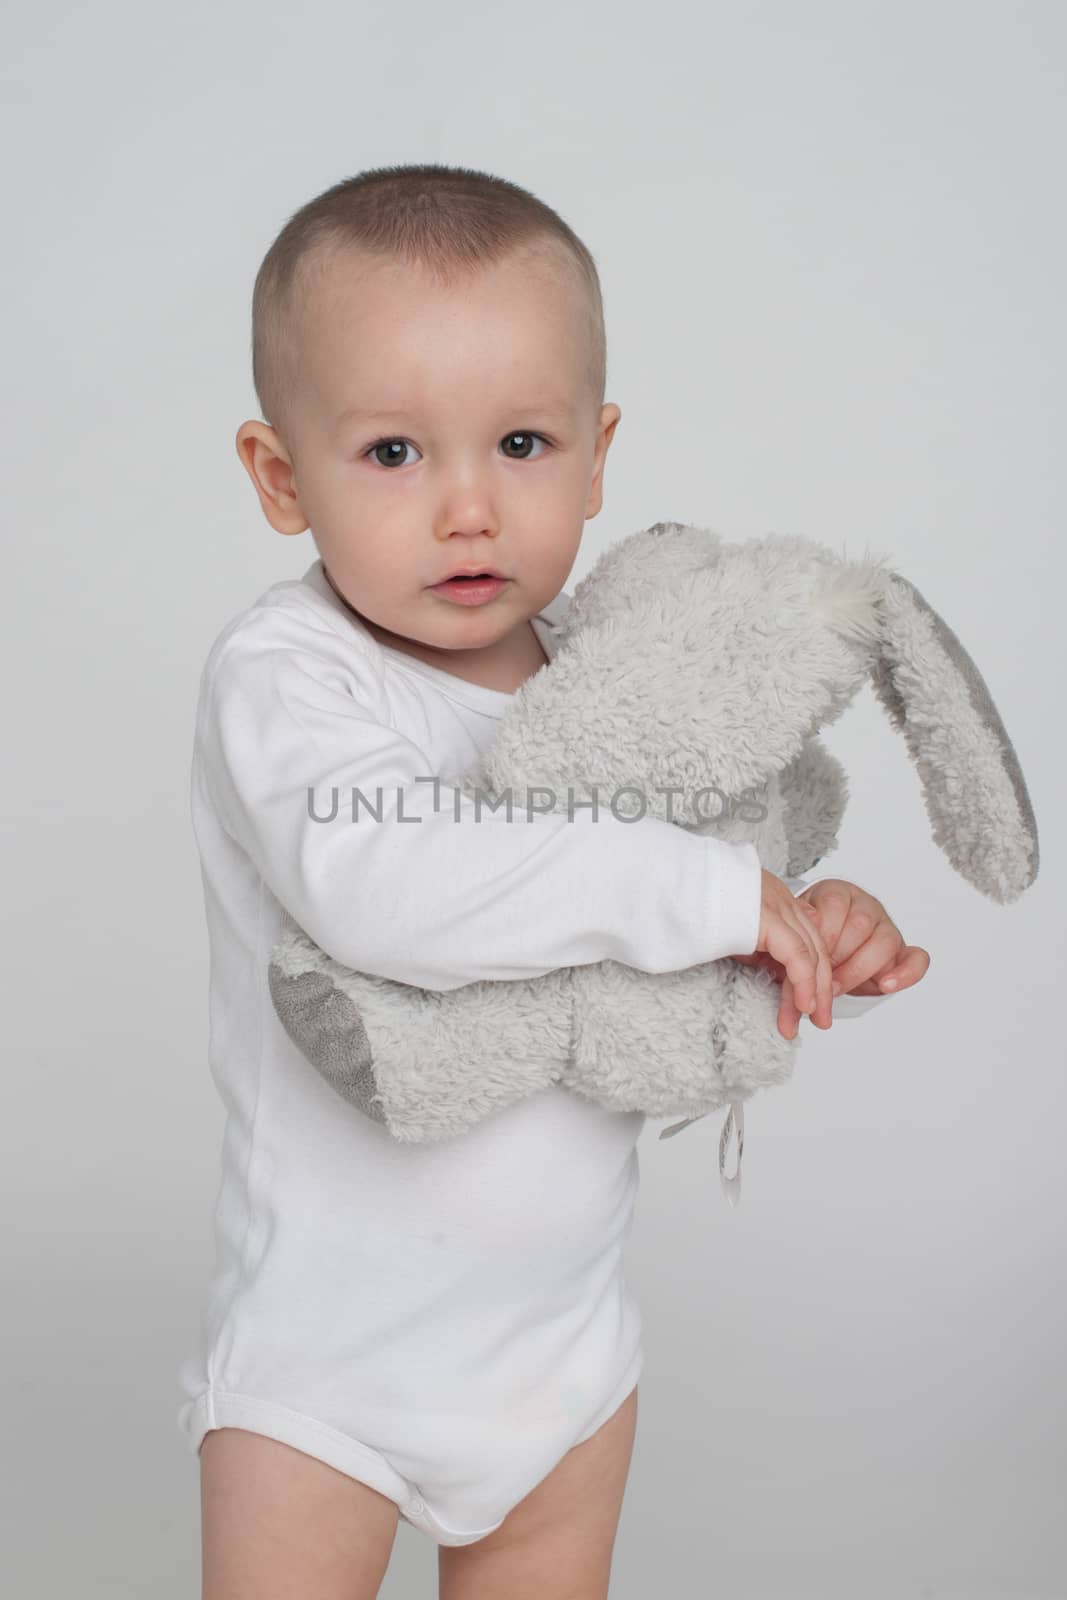 baby on a white background with a soft toy bunny